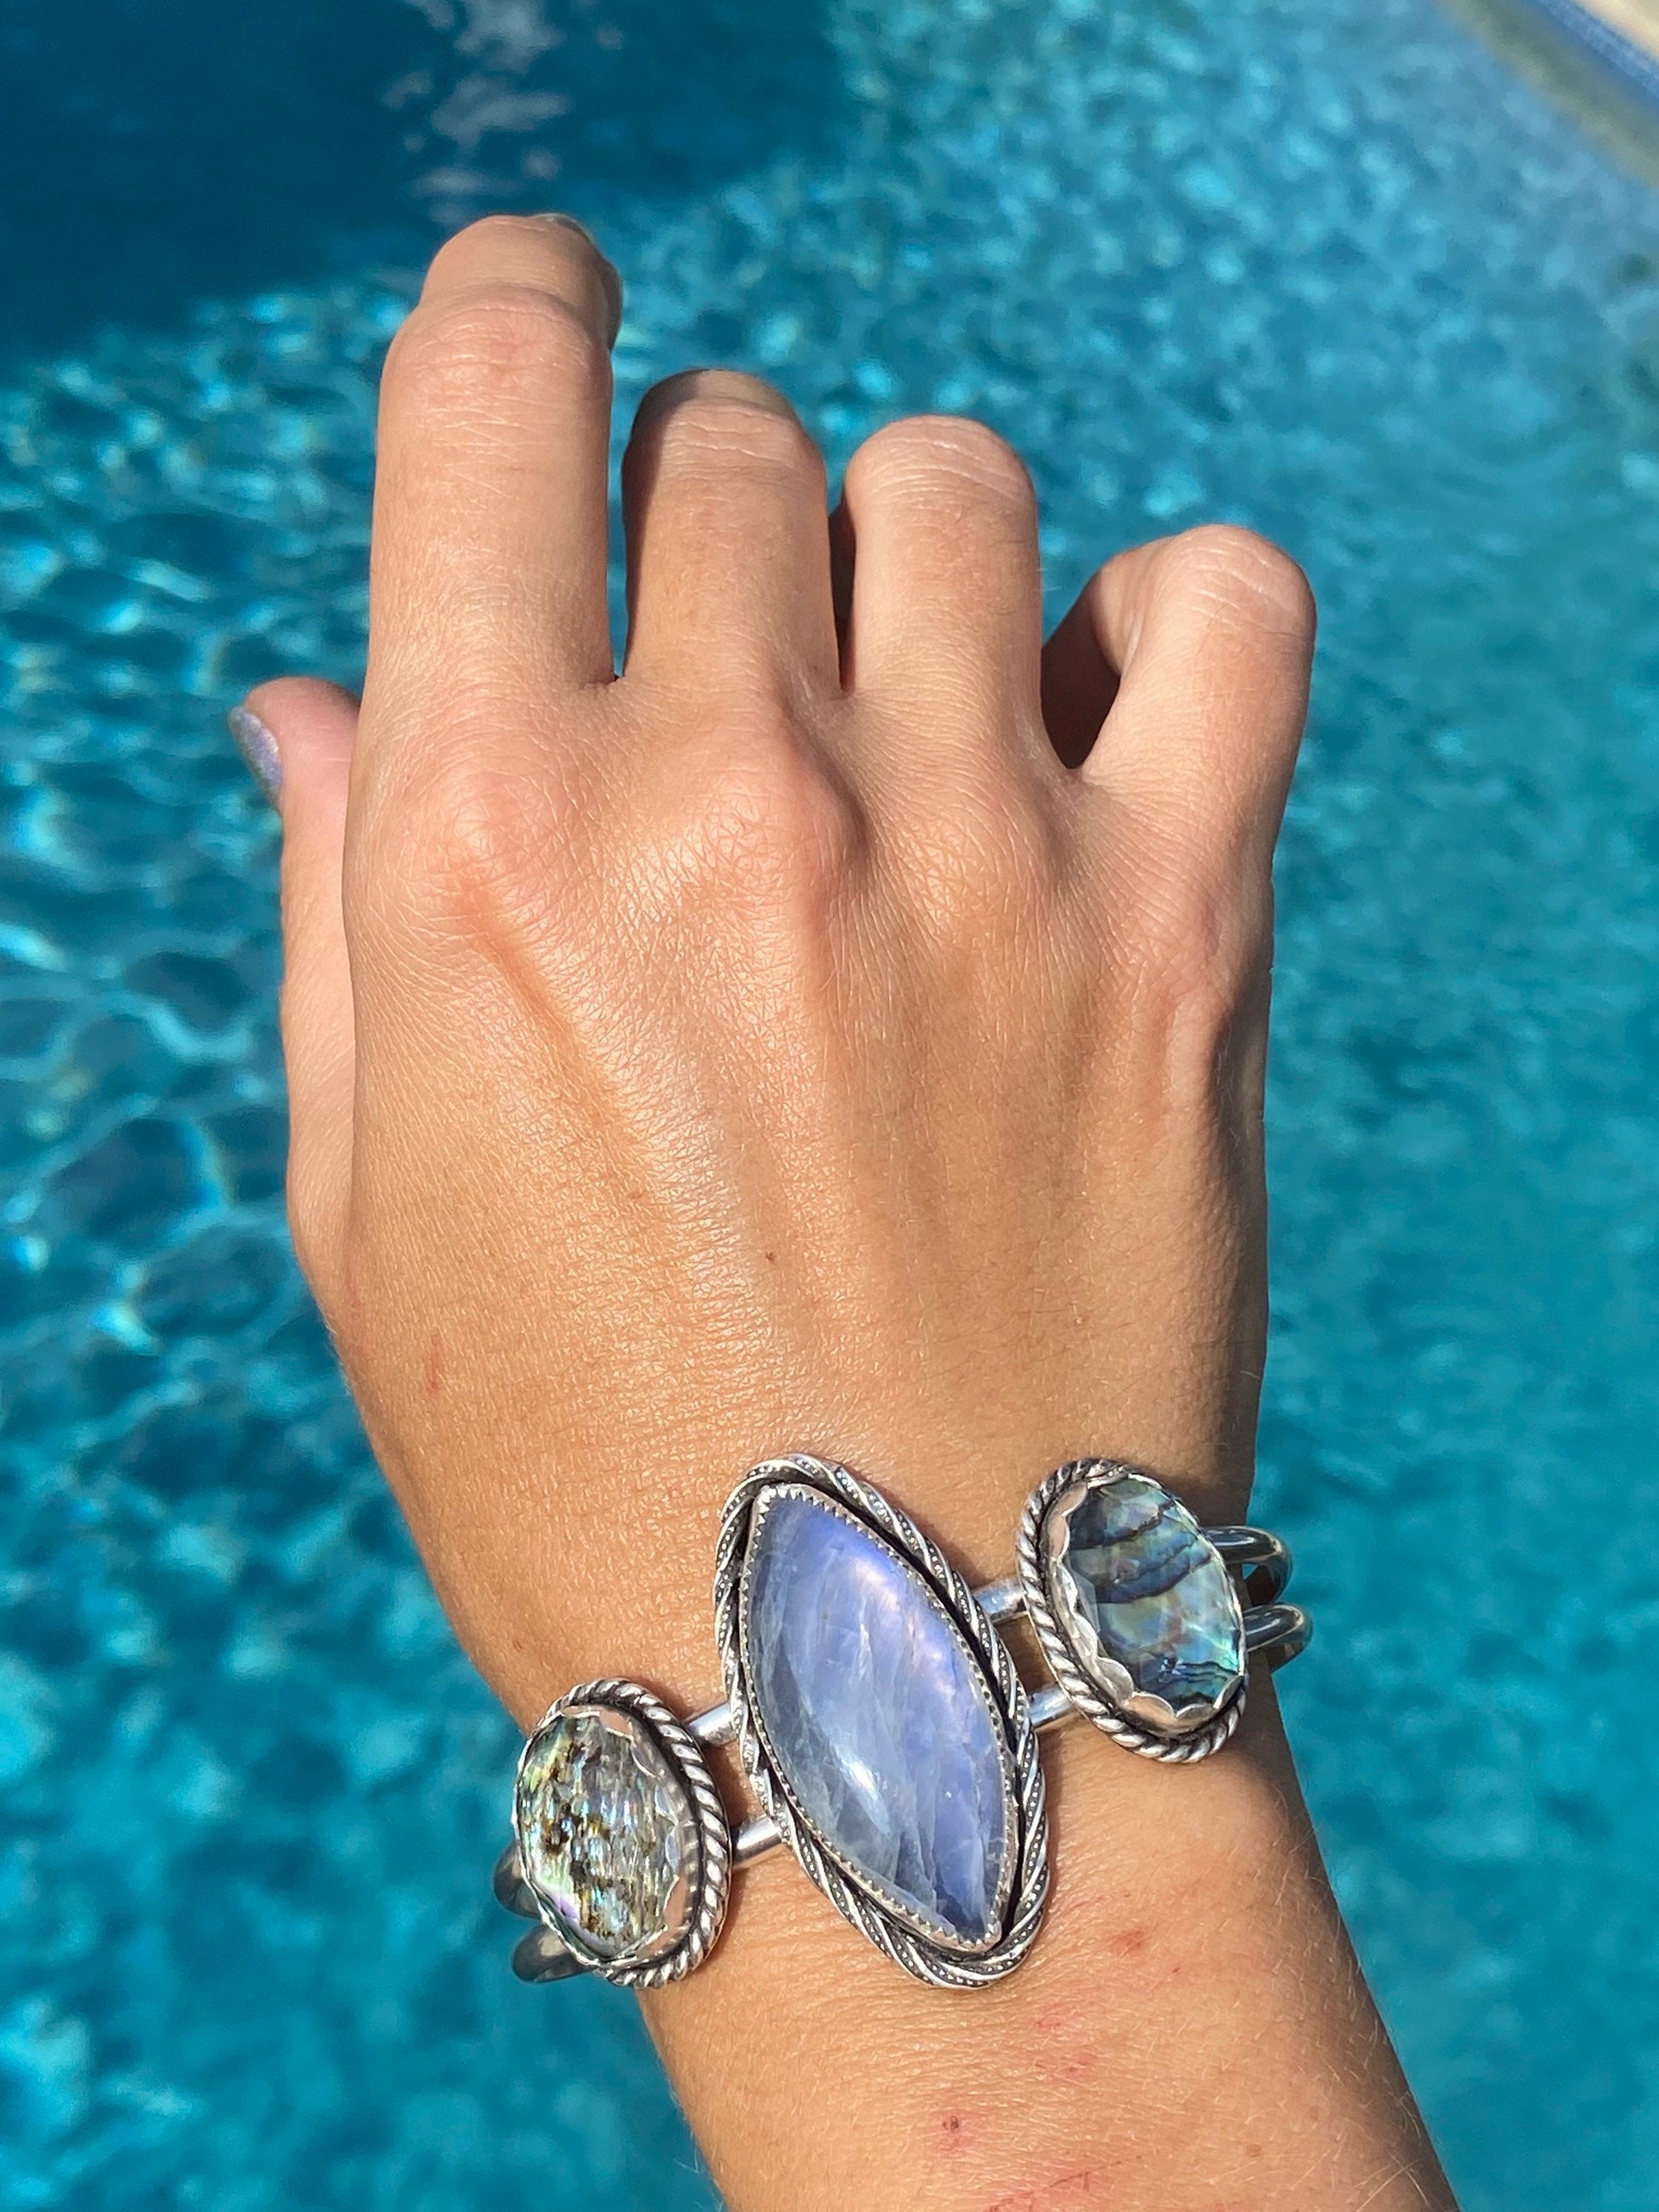 //Once and thebohemianfairie Collecti Abalone/Quartz – Doublet a Dream Upon Moonstone Cuff